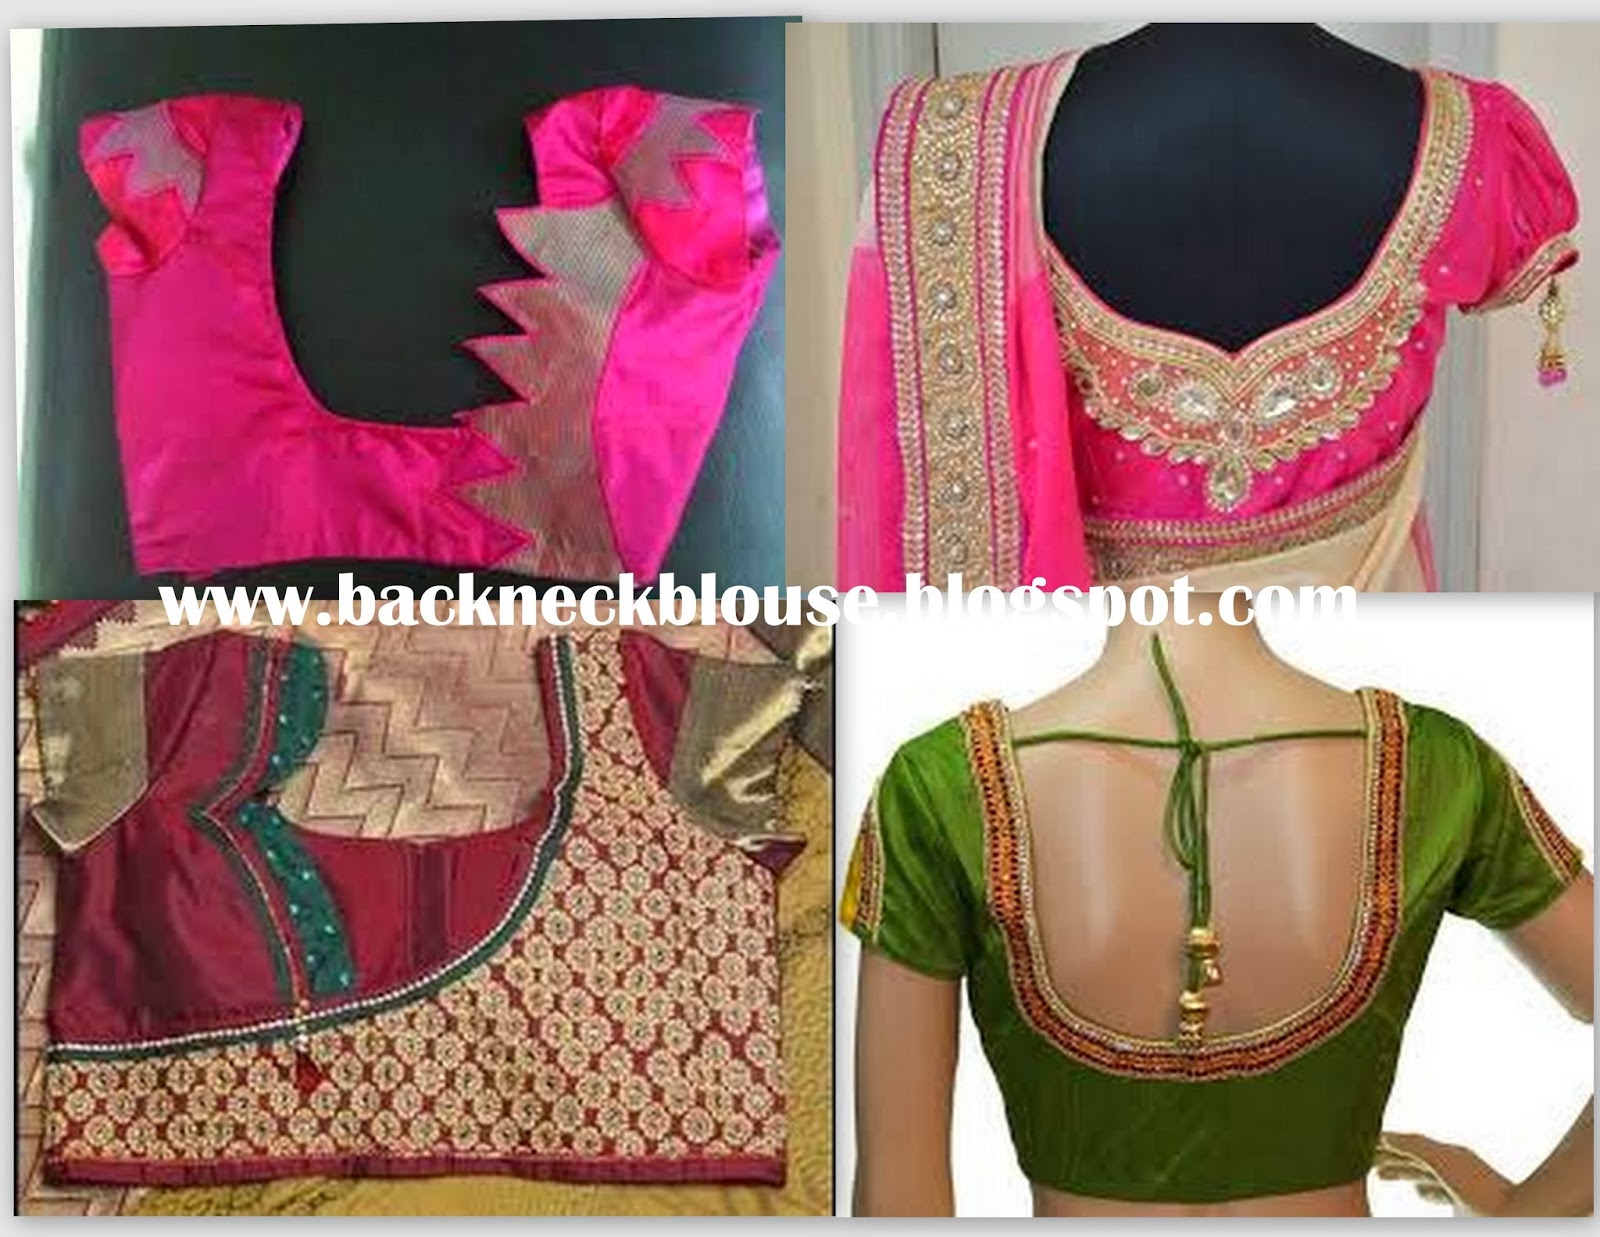 BACK NECK BLOUSE READY MADE AND CUSTOMIZED DESIGNER BLOUSE WITH BLOUSE  DESIGNS CATALOGUE : New trend back neck blouse